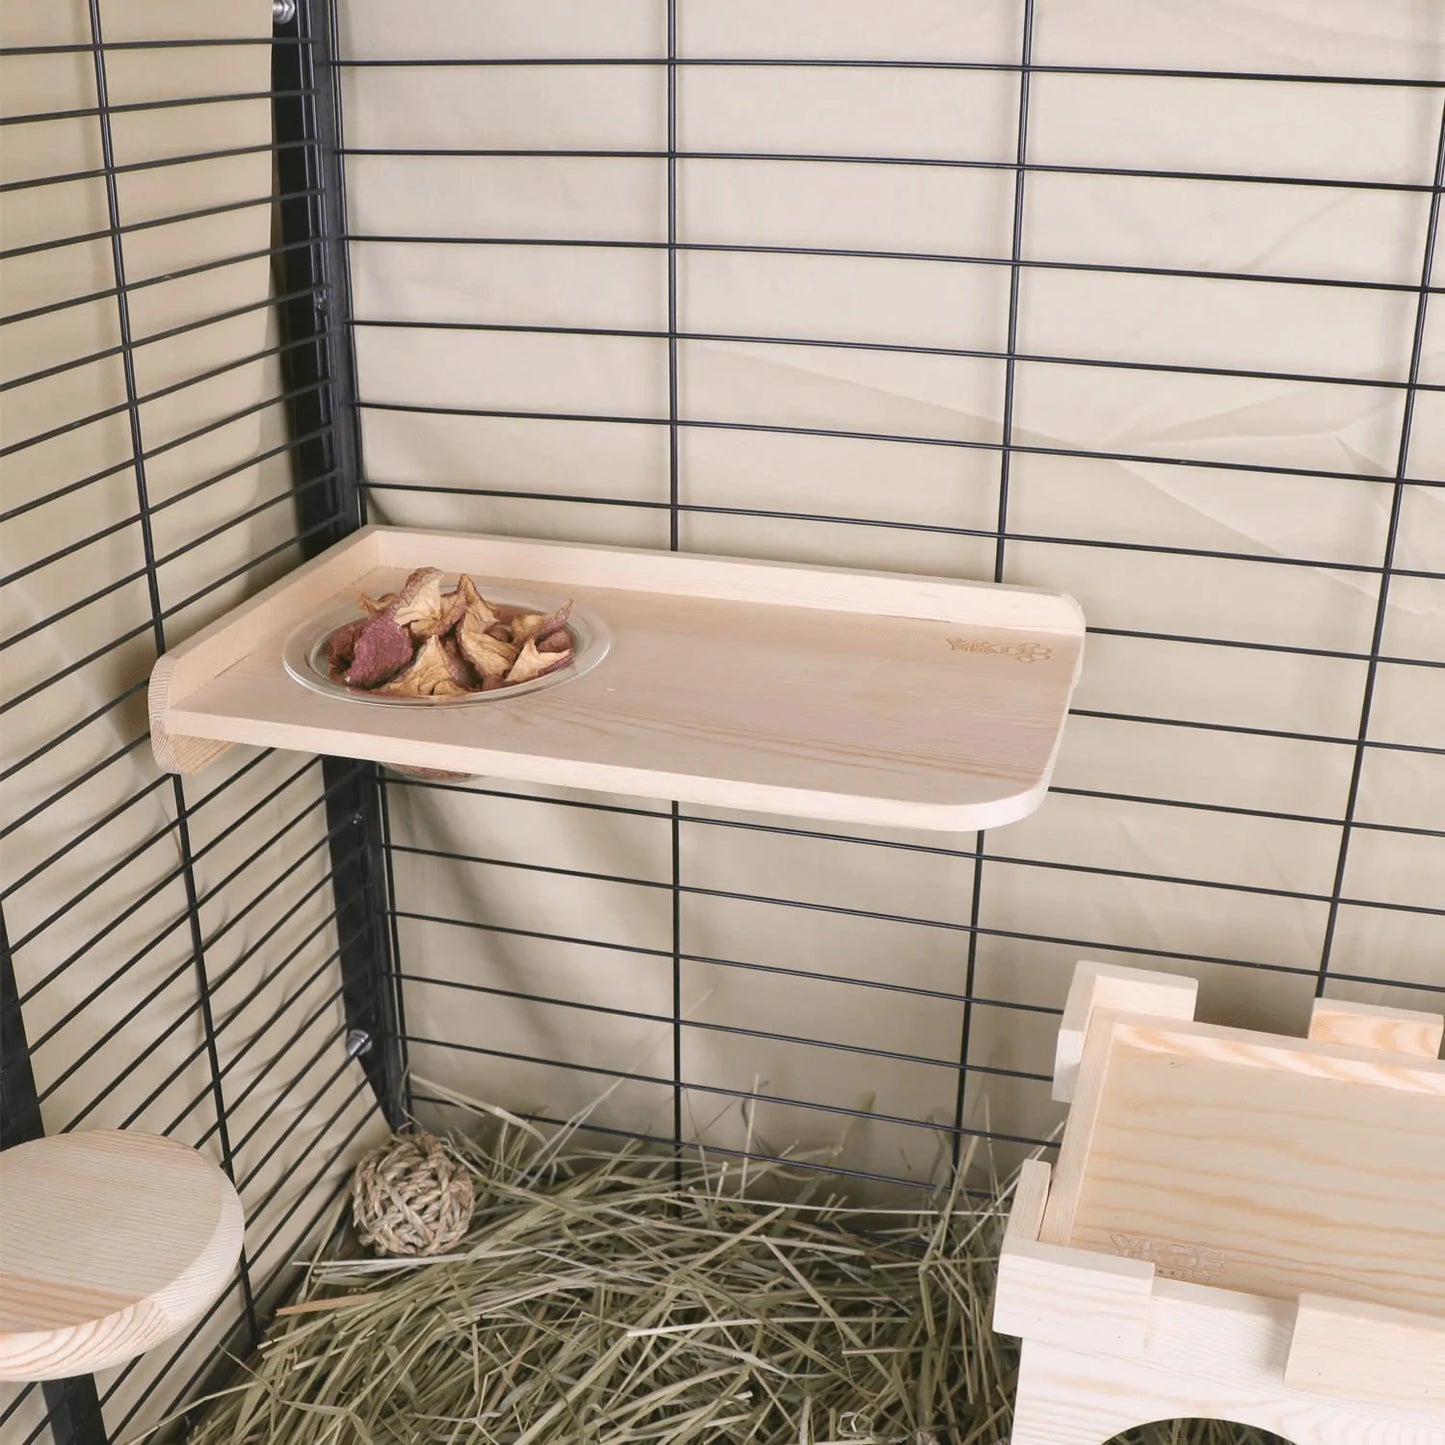 YKD Small Animals Natural Wood Stand Platform with Acrylic Feeding Bowl, Chinchilla Habitat Feeding Platform, Small Animals Cage Accessories for Chinchilla Squirrel Gerbil Suger Glider Hamsters